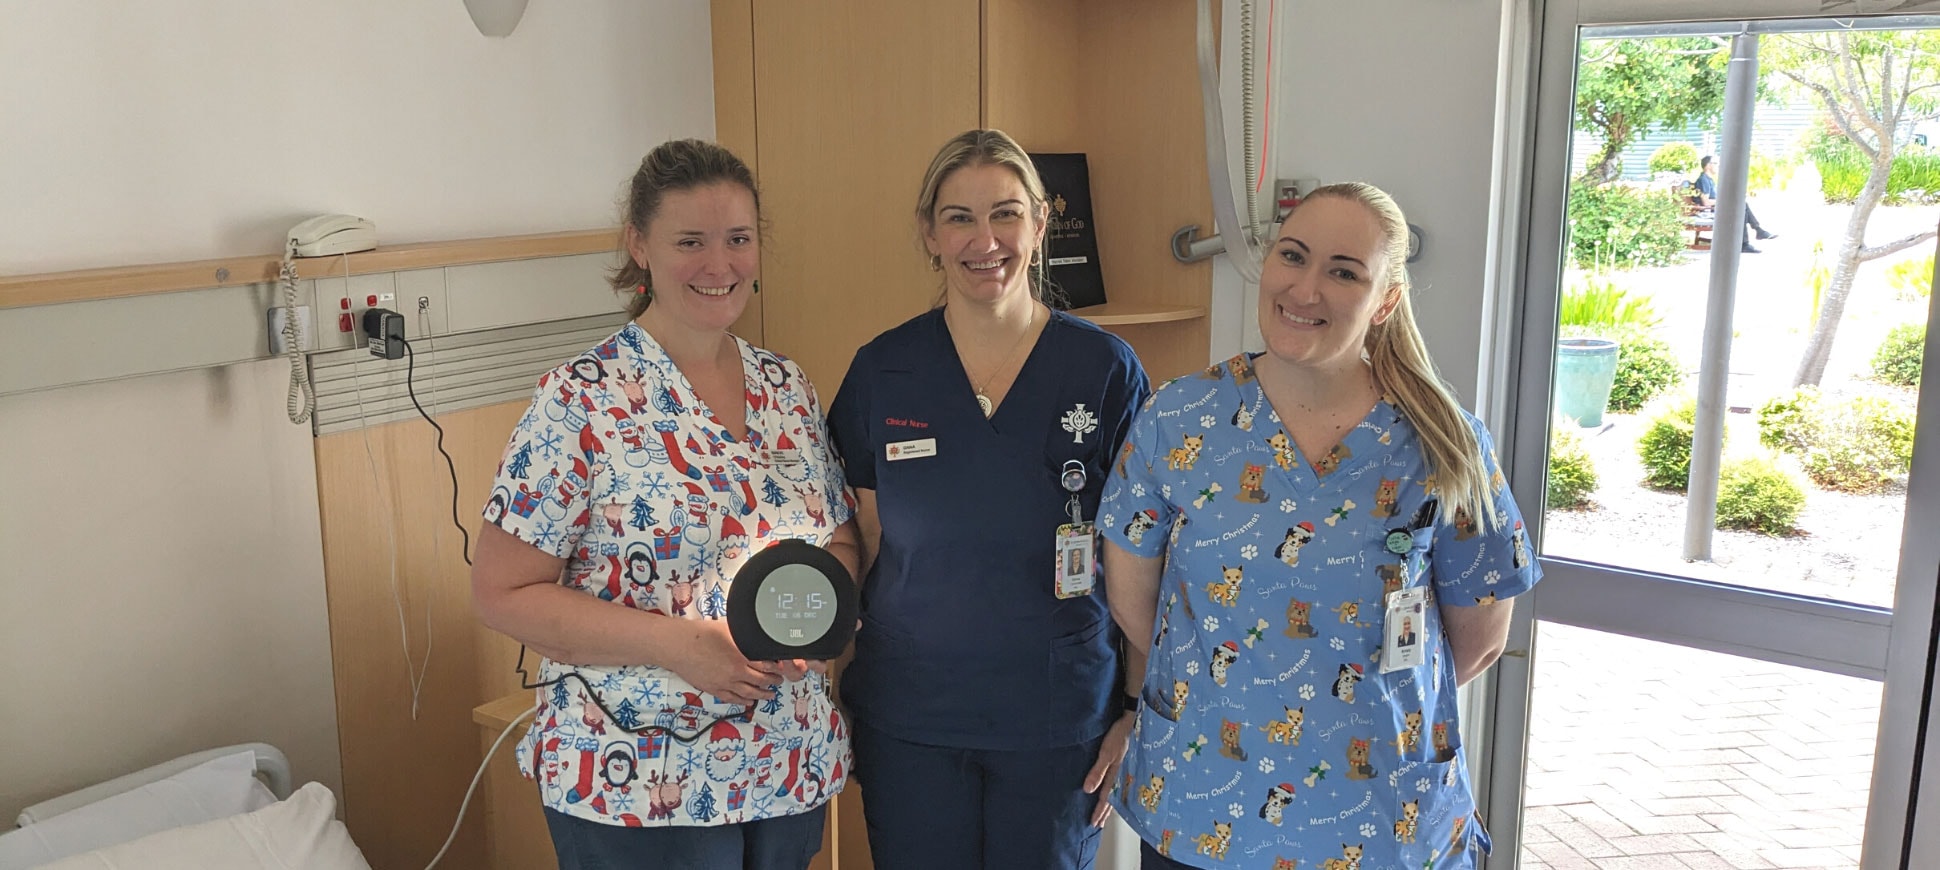 Maeve O’Malley (Acting Nurse Unit Manager), Dana Cederman (Clinical Nurse), and Kirsty Bright (Registered Nurse) installing new digital radios in palliative patient rooms.